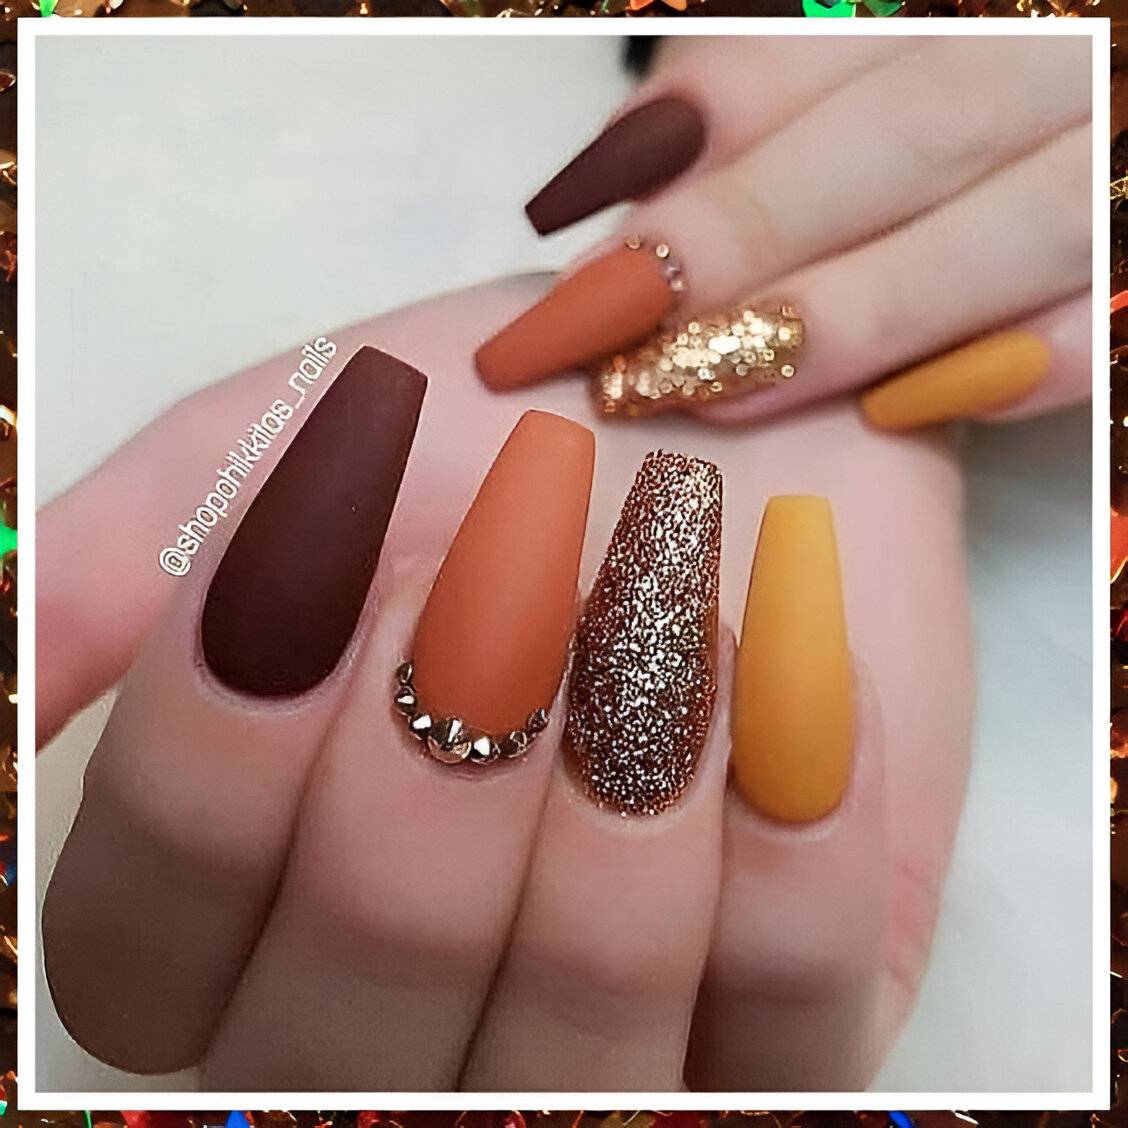 30 Autumn Nail Designs Too Chic To Resist - 233